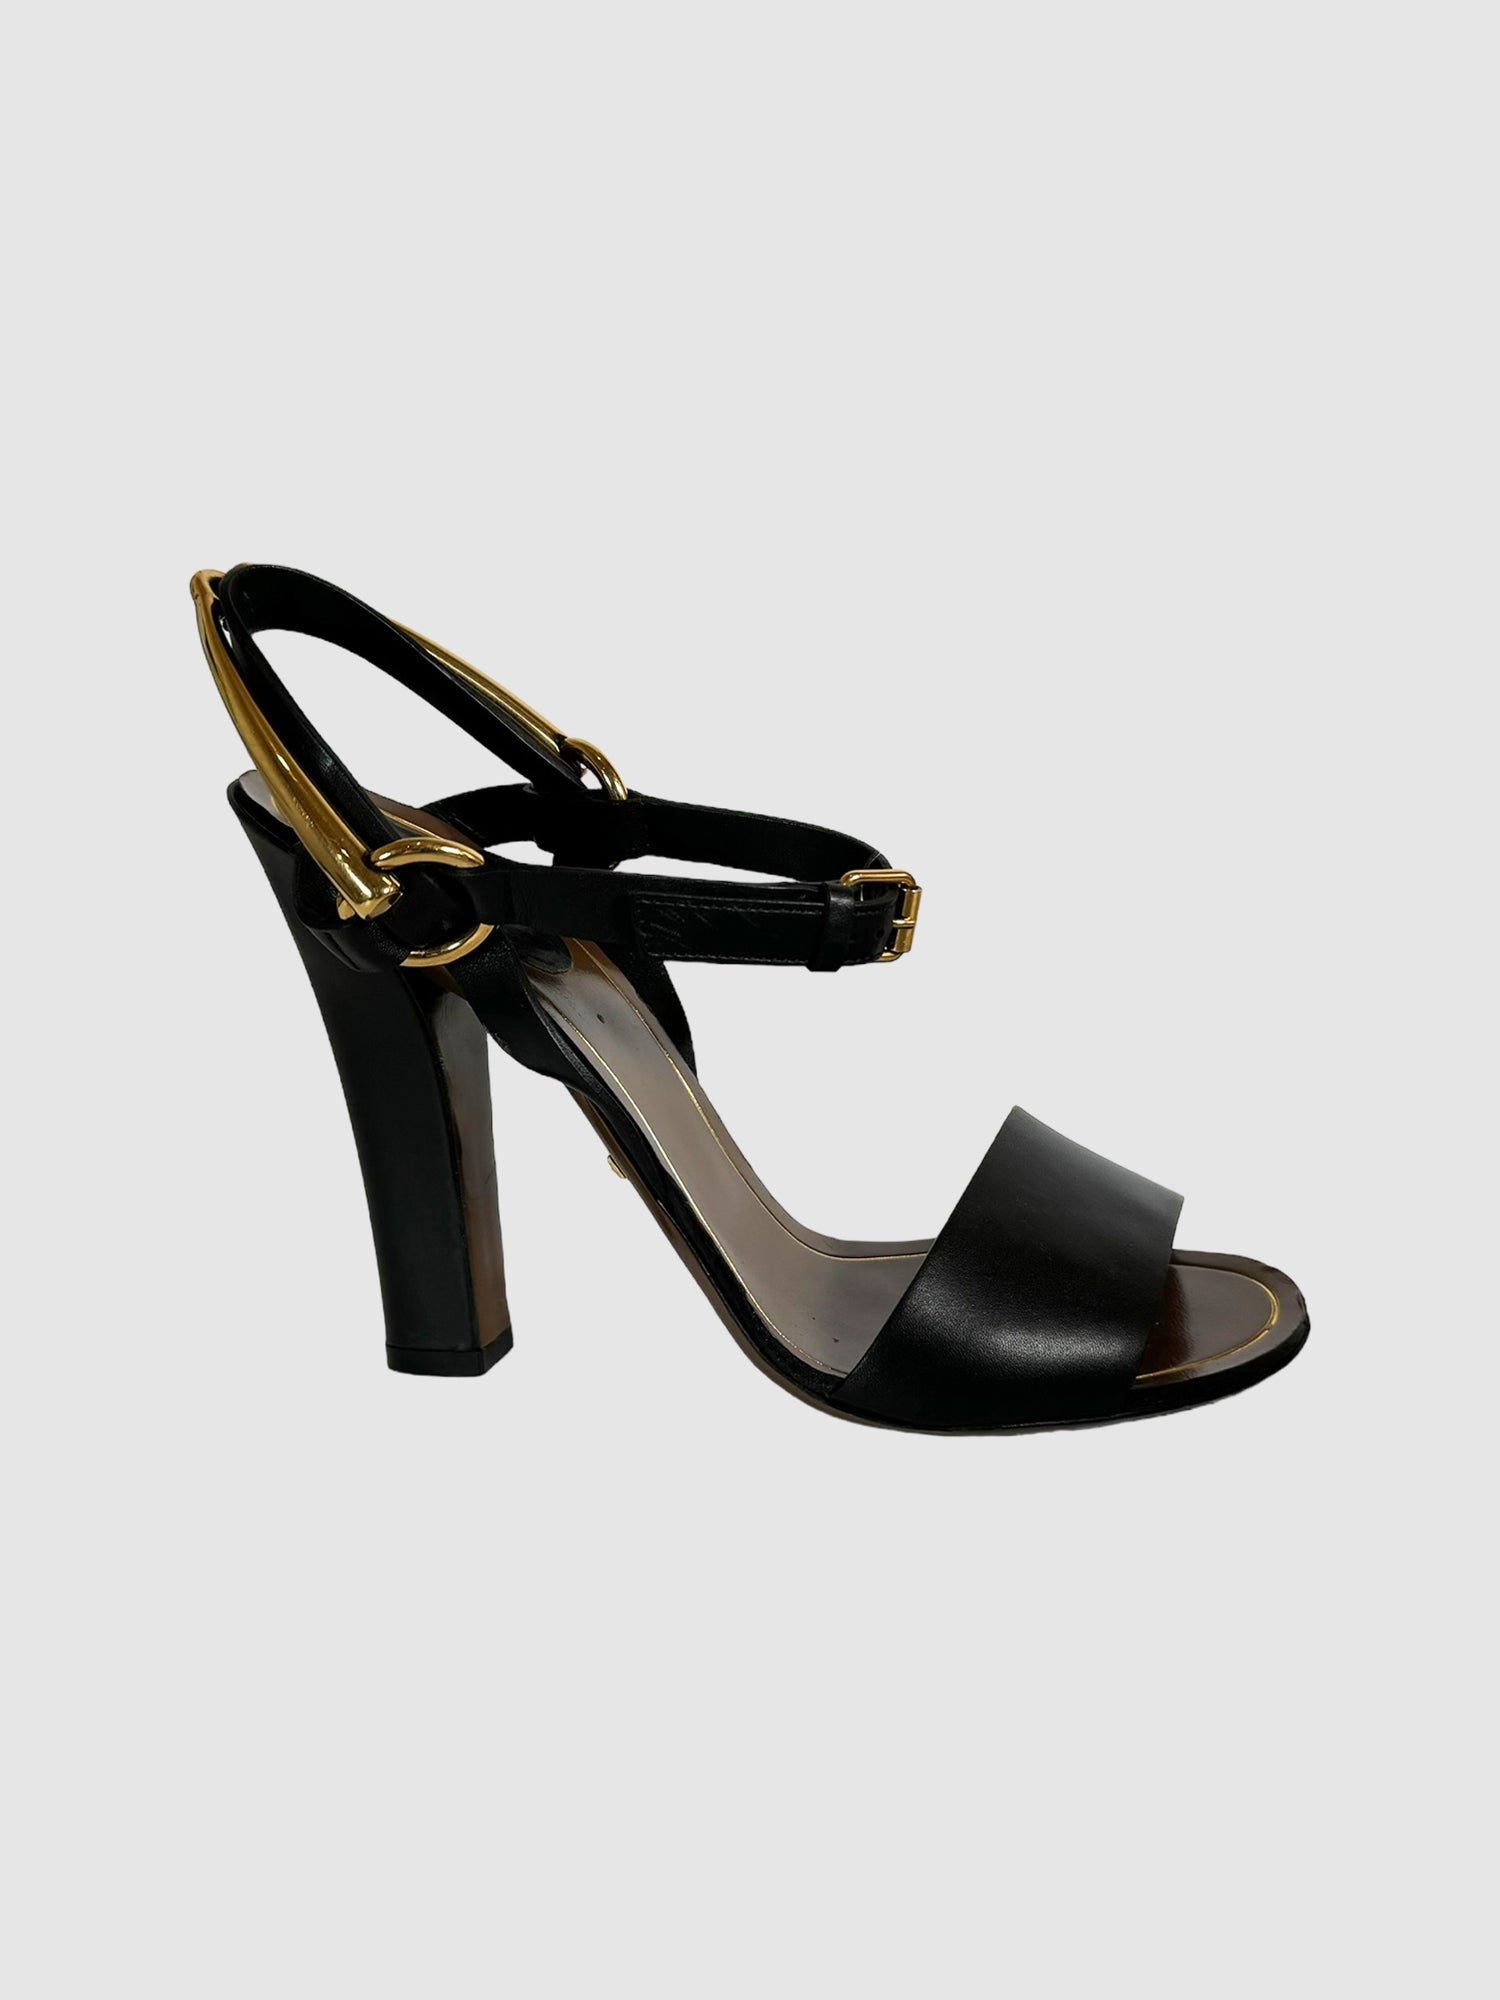 Gucci Black Leather Strappy Sandals with Gold-Tone Buckle Design on Ankle Designer Thrift Luxury Consignment